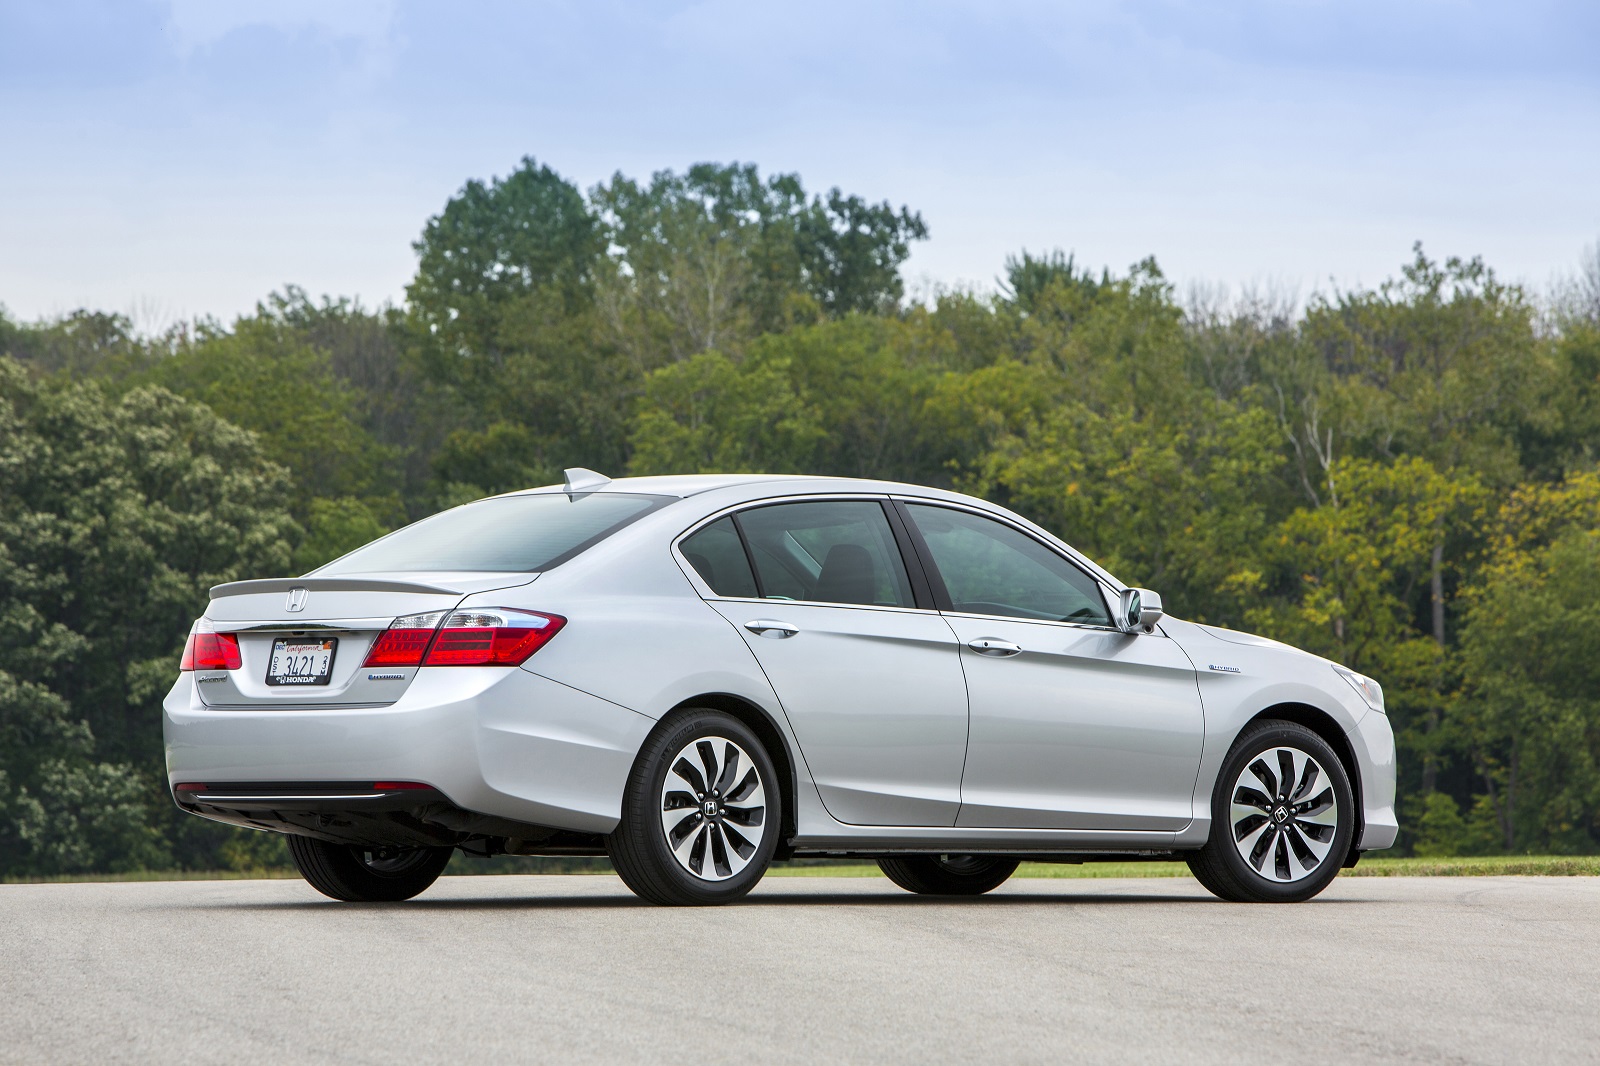 2015 Honda Accord Review Ratings Specs Prices And Photos - honda accord new model price